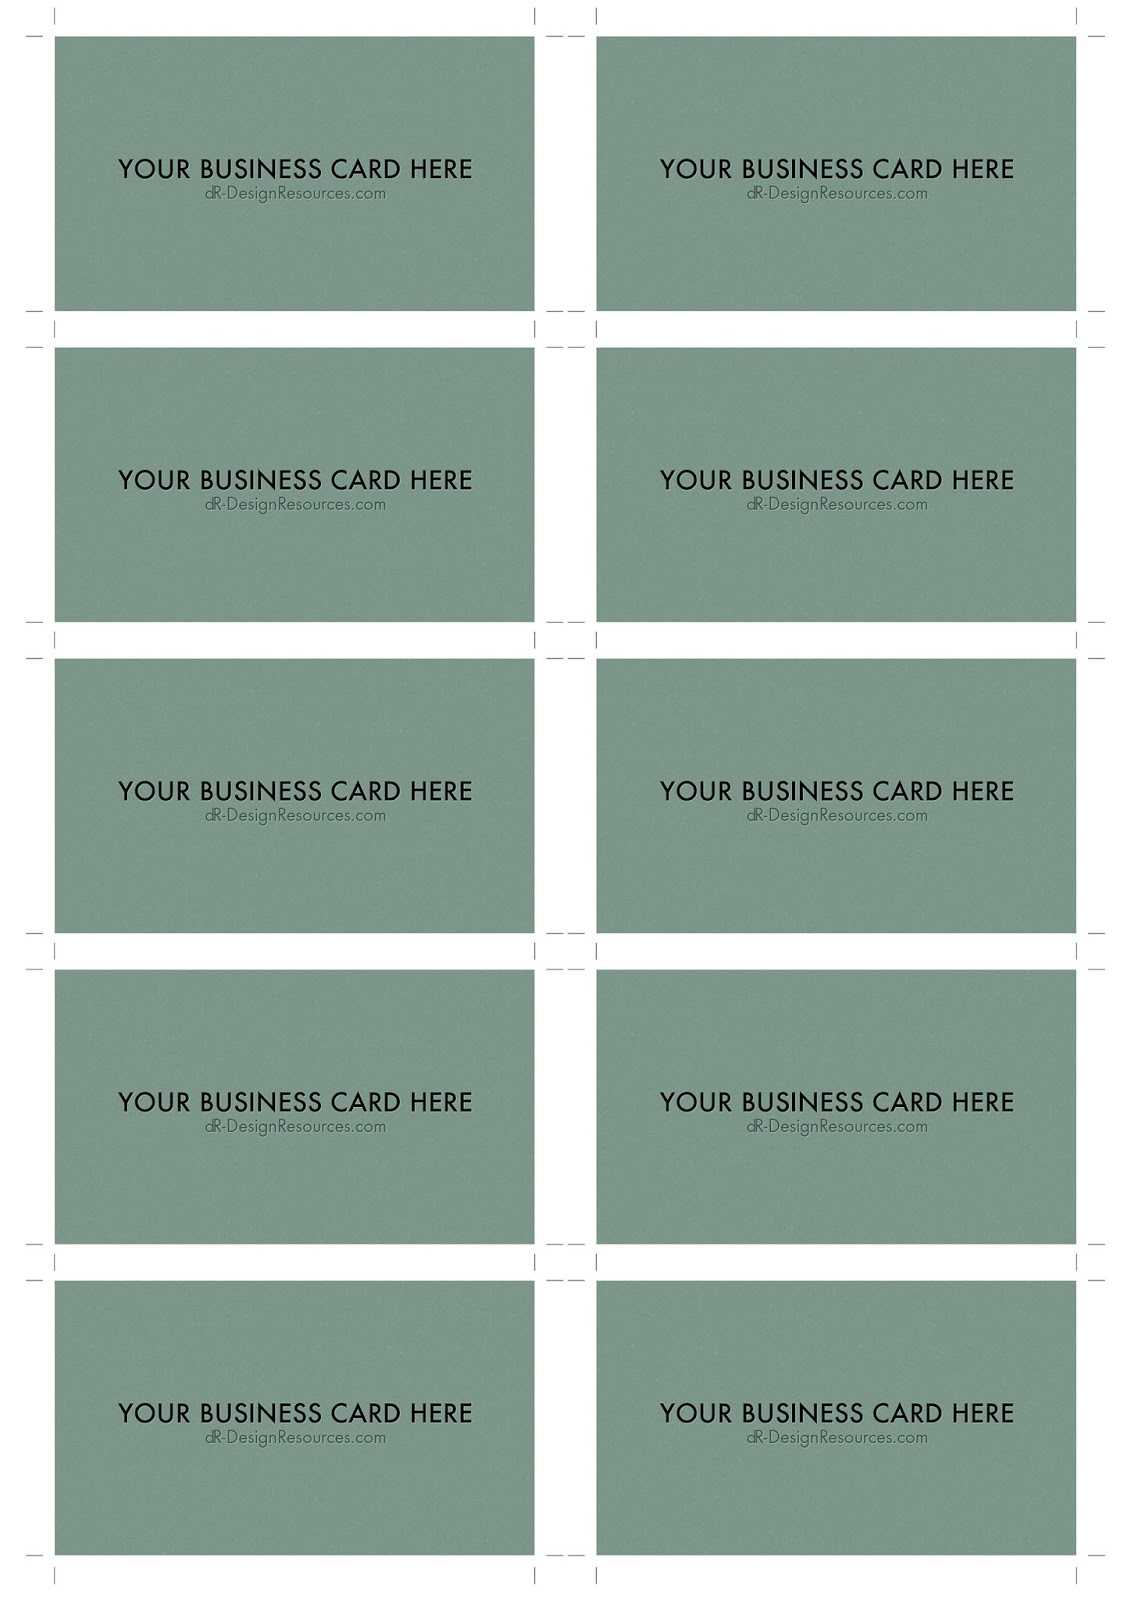 A4 Business Card Template Psd (10 Per Sheet) | Dr Design With Regard To Name Card Template Photoshop